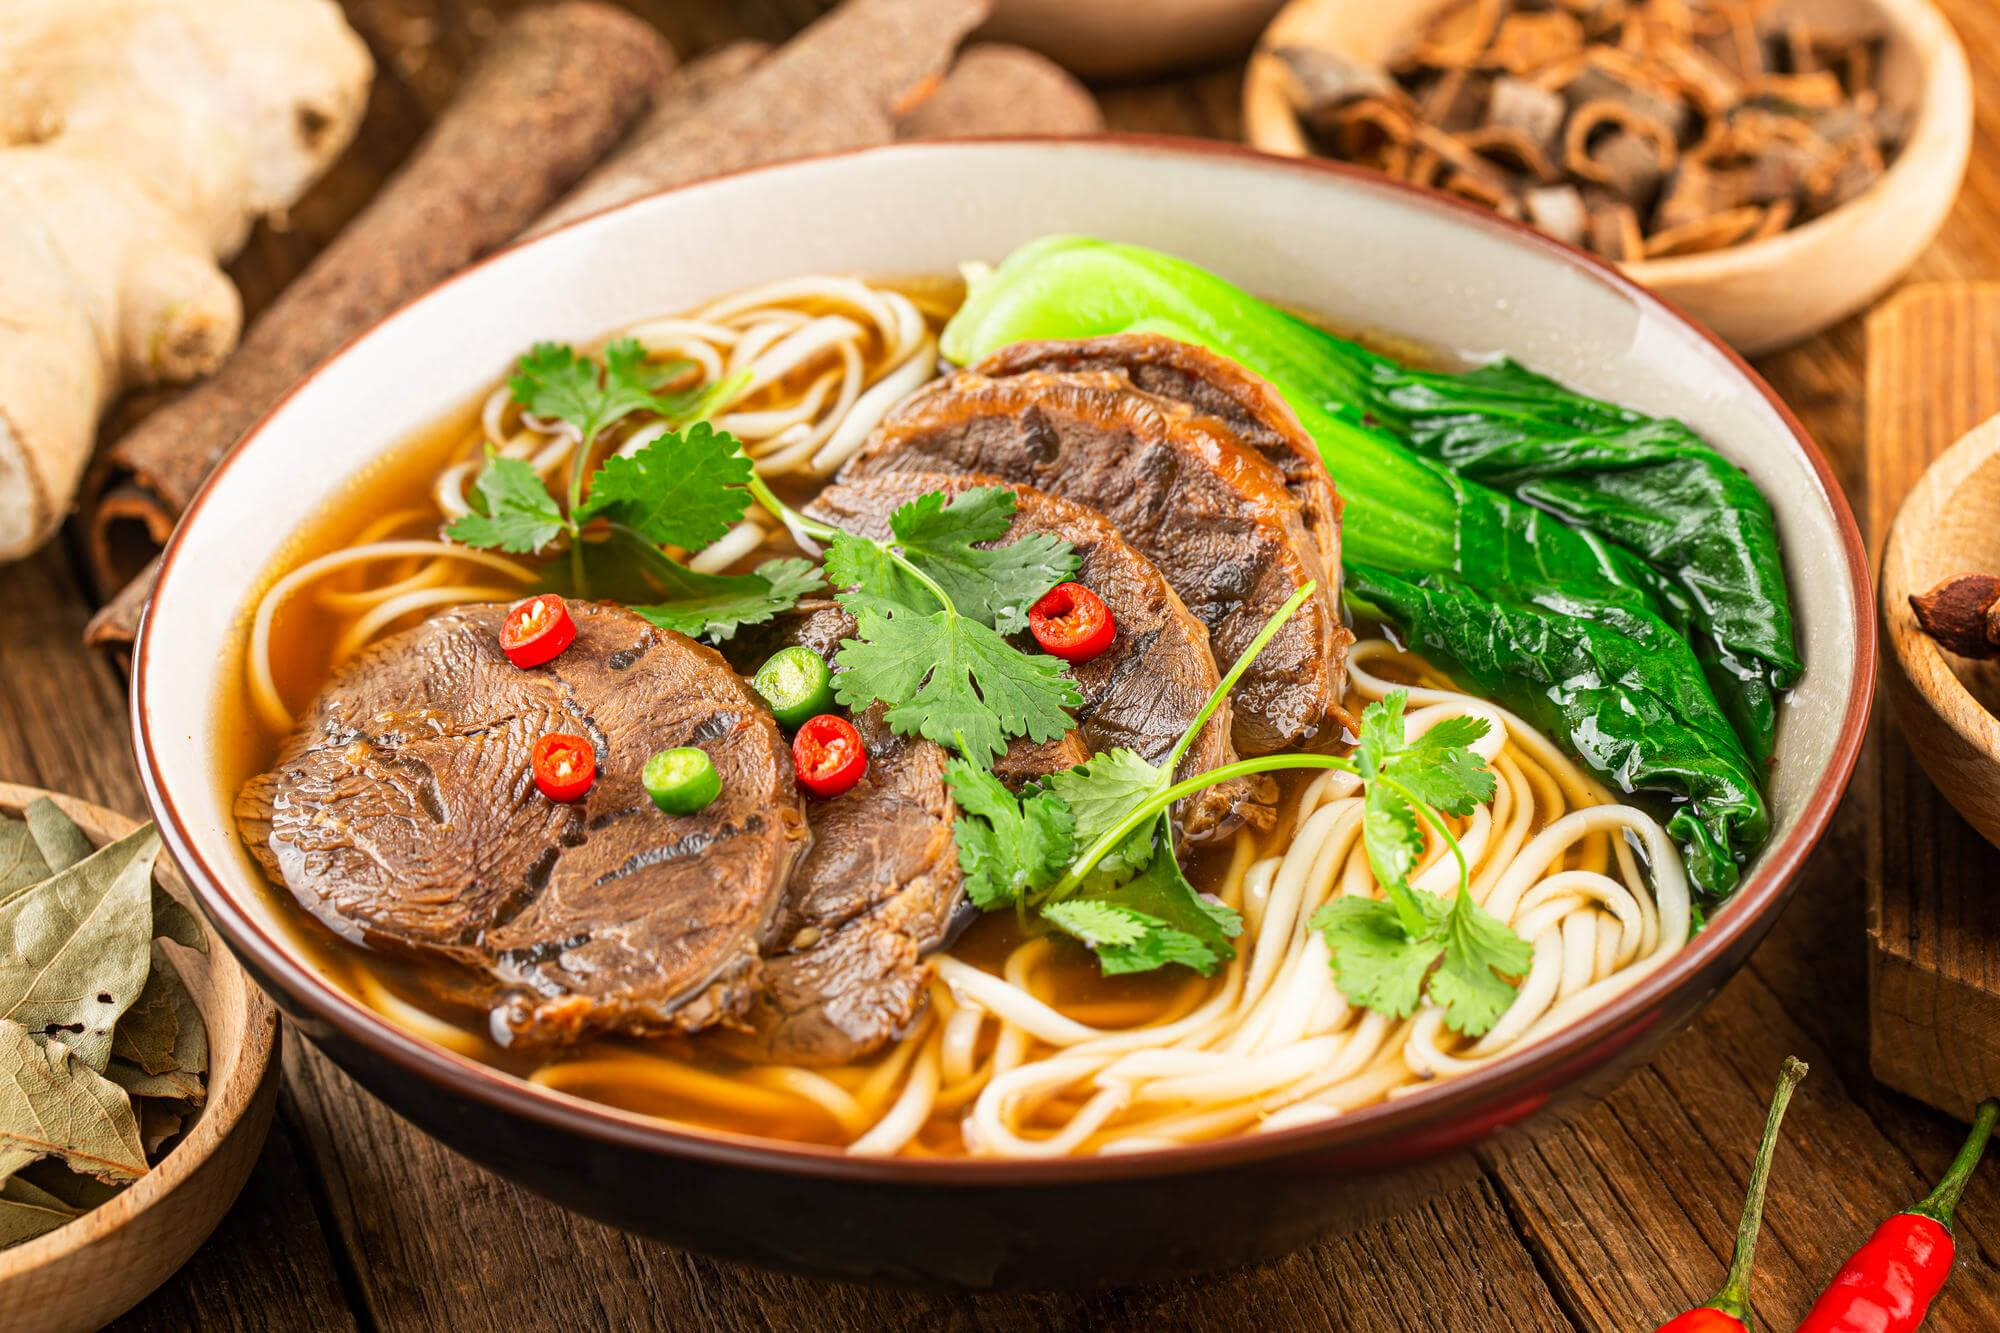 This hearty Hong Kong Chinese food is perfect for a cold day